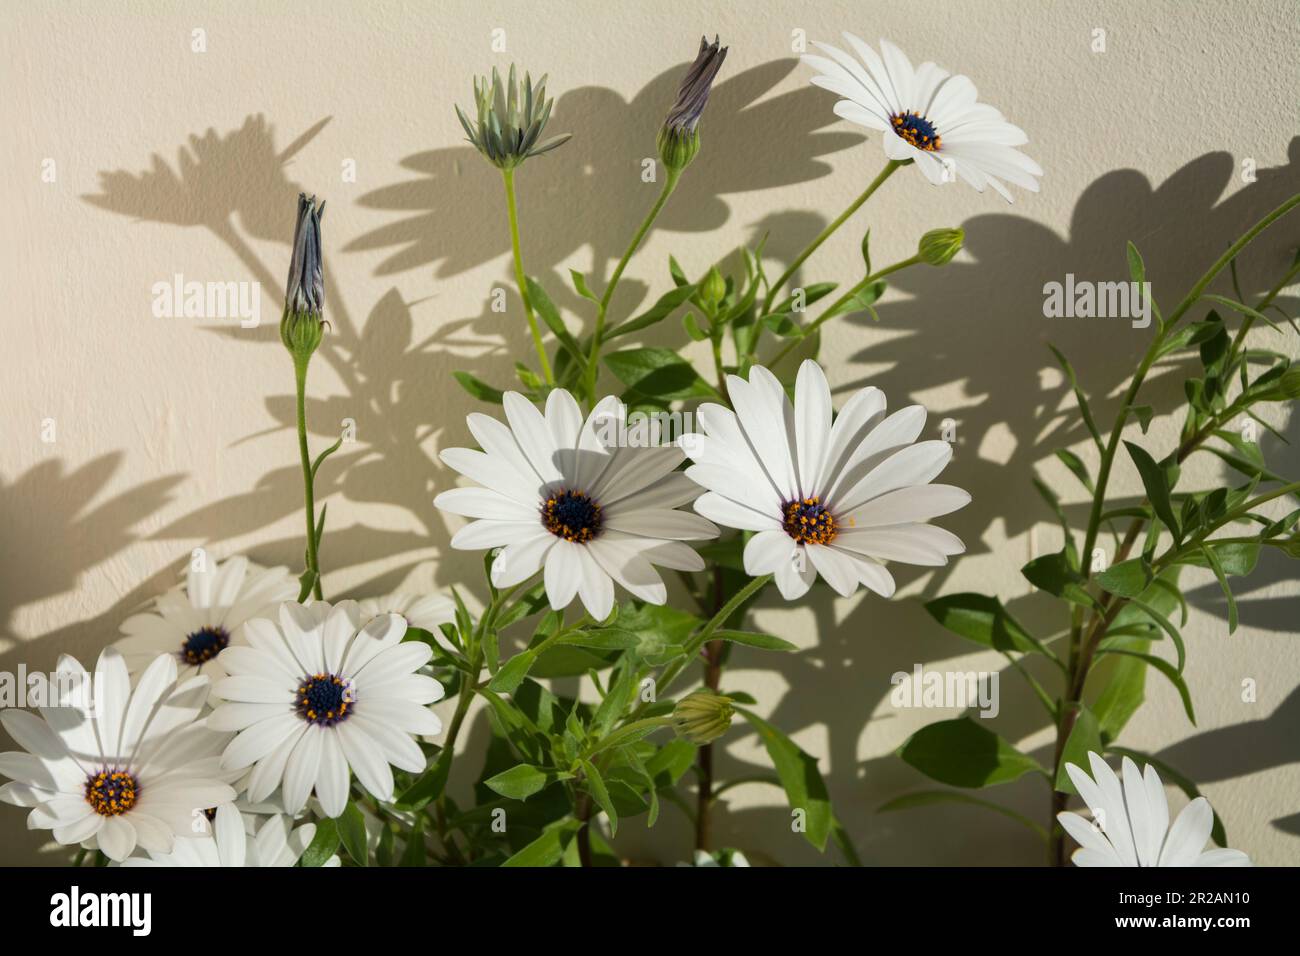 Close-up of a White daisy bush (Dimorphotheca ecklonis) with beautiful blossoms in daylight with shadows on the wall behind. Horizontal image with sel Stock Photo